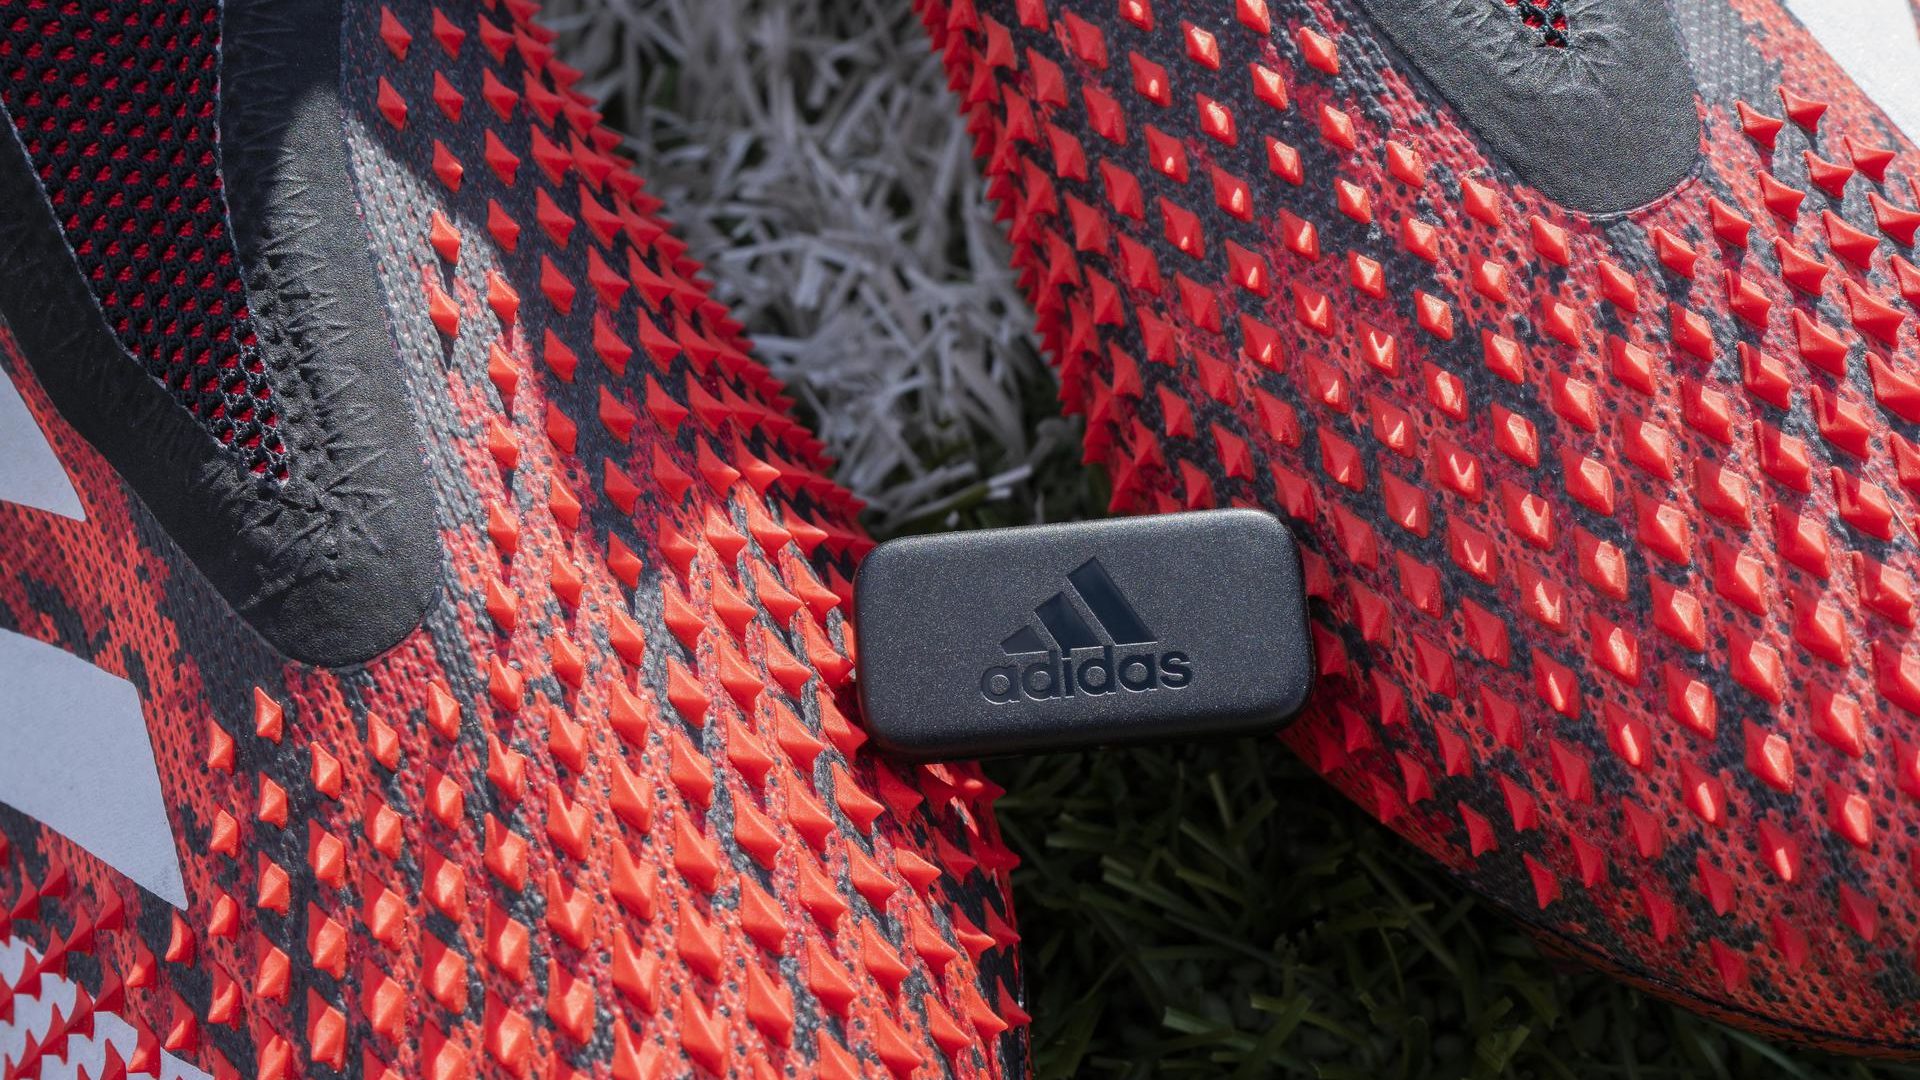 The Adidas GMR tag, made in conjunction with Google and EA.